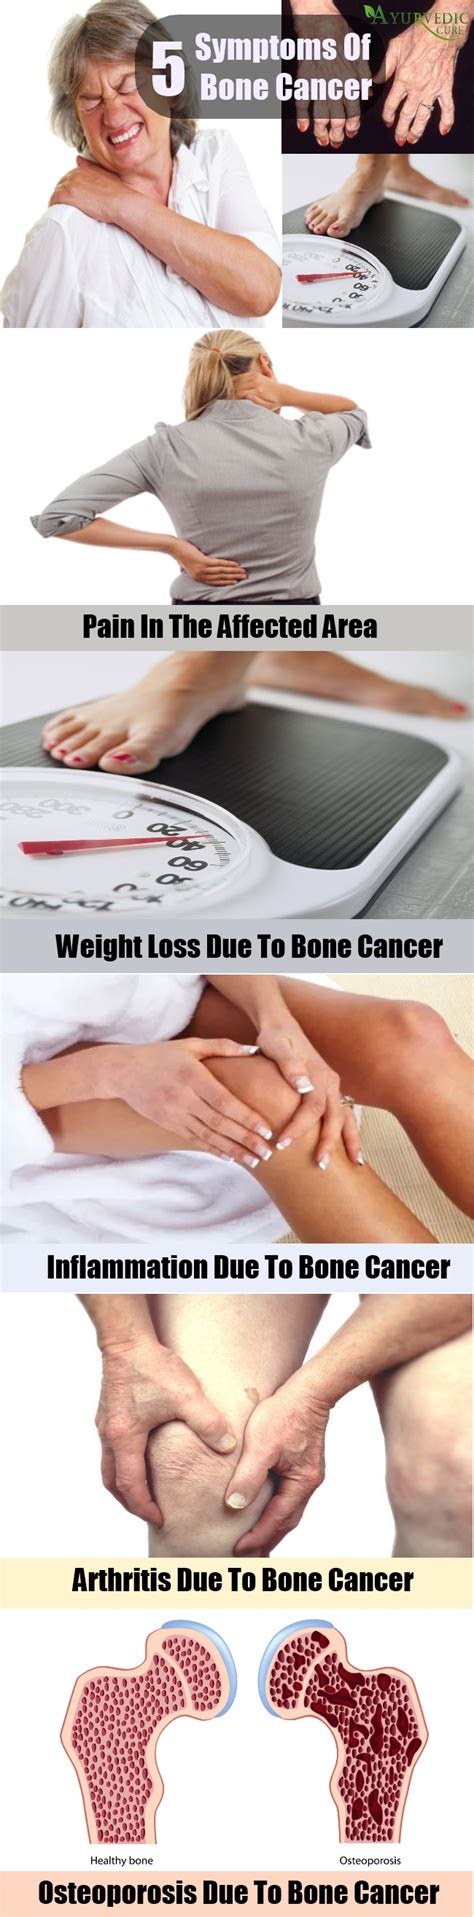 Various Bone Cancer Signs And Symptoms | Herbal Supplements